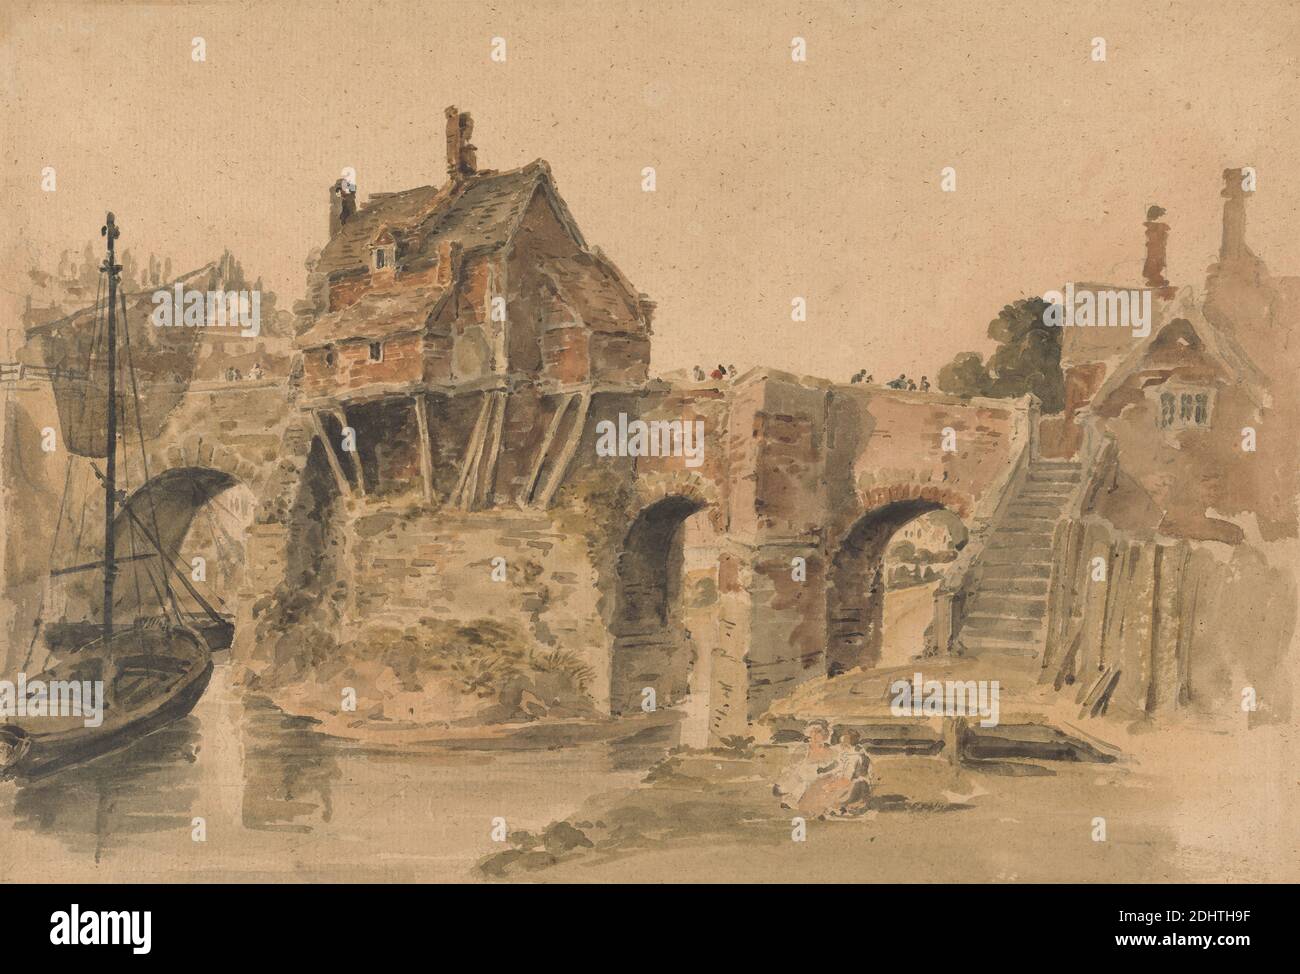 Bridgnorth, John Thirtle, 1777–1839, British, undated, Watercolor and graphite on medium, moderately textured, beige laid paper, Sheet: 9 13/16 × 14 7/16 inches (24.9 × 36.7 cm), architectural subject Stock Photo